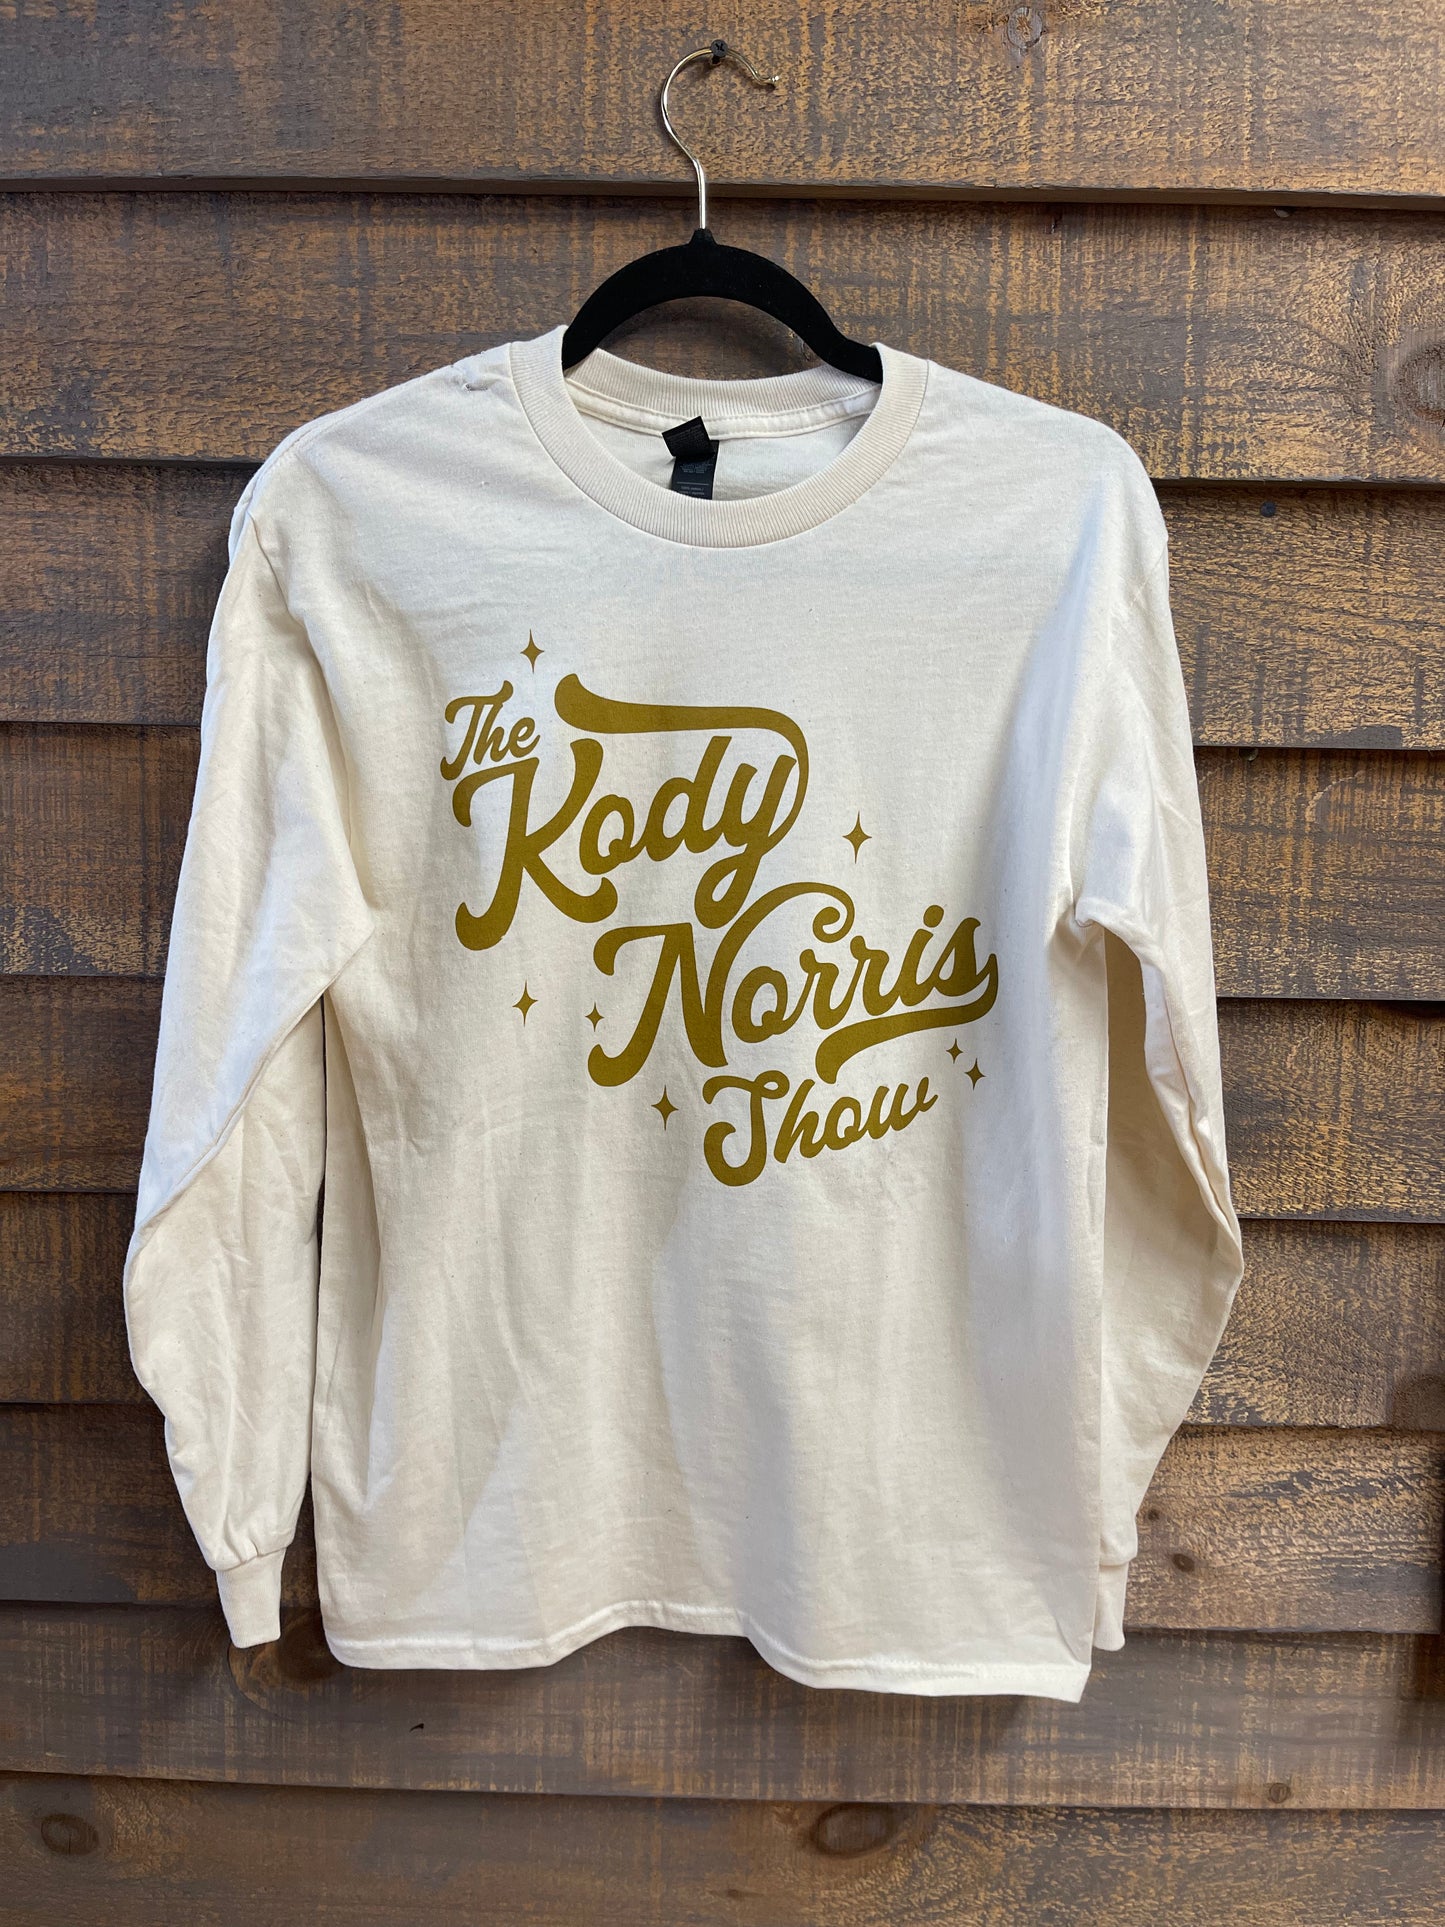 The Kody Norris Show Graphic Tee (Long Sleeve, Color Natural) Natural with Gold Lettering on the front and back Long Sleeve Gildan.